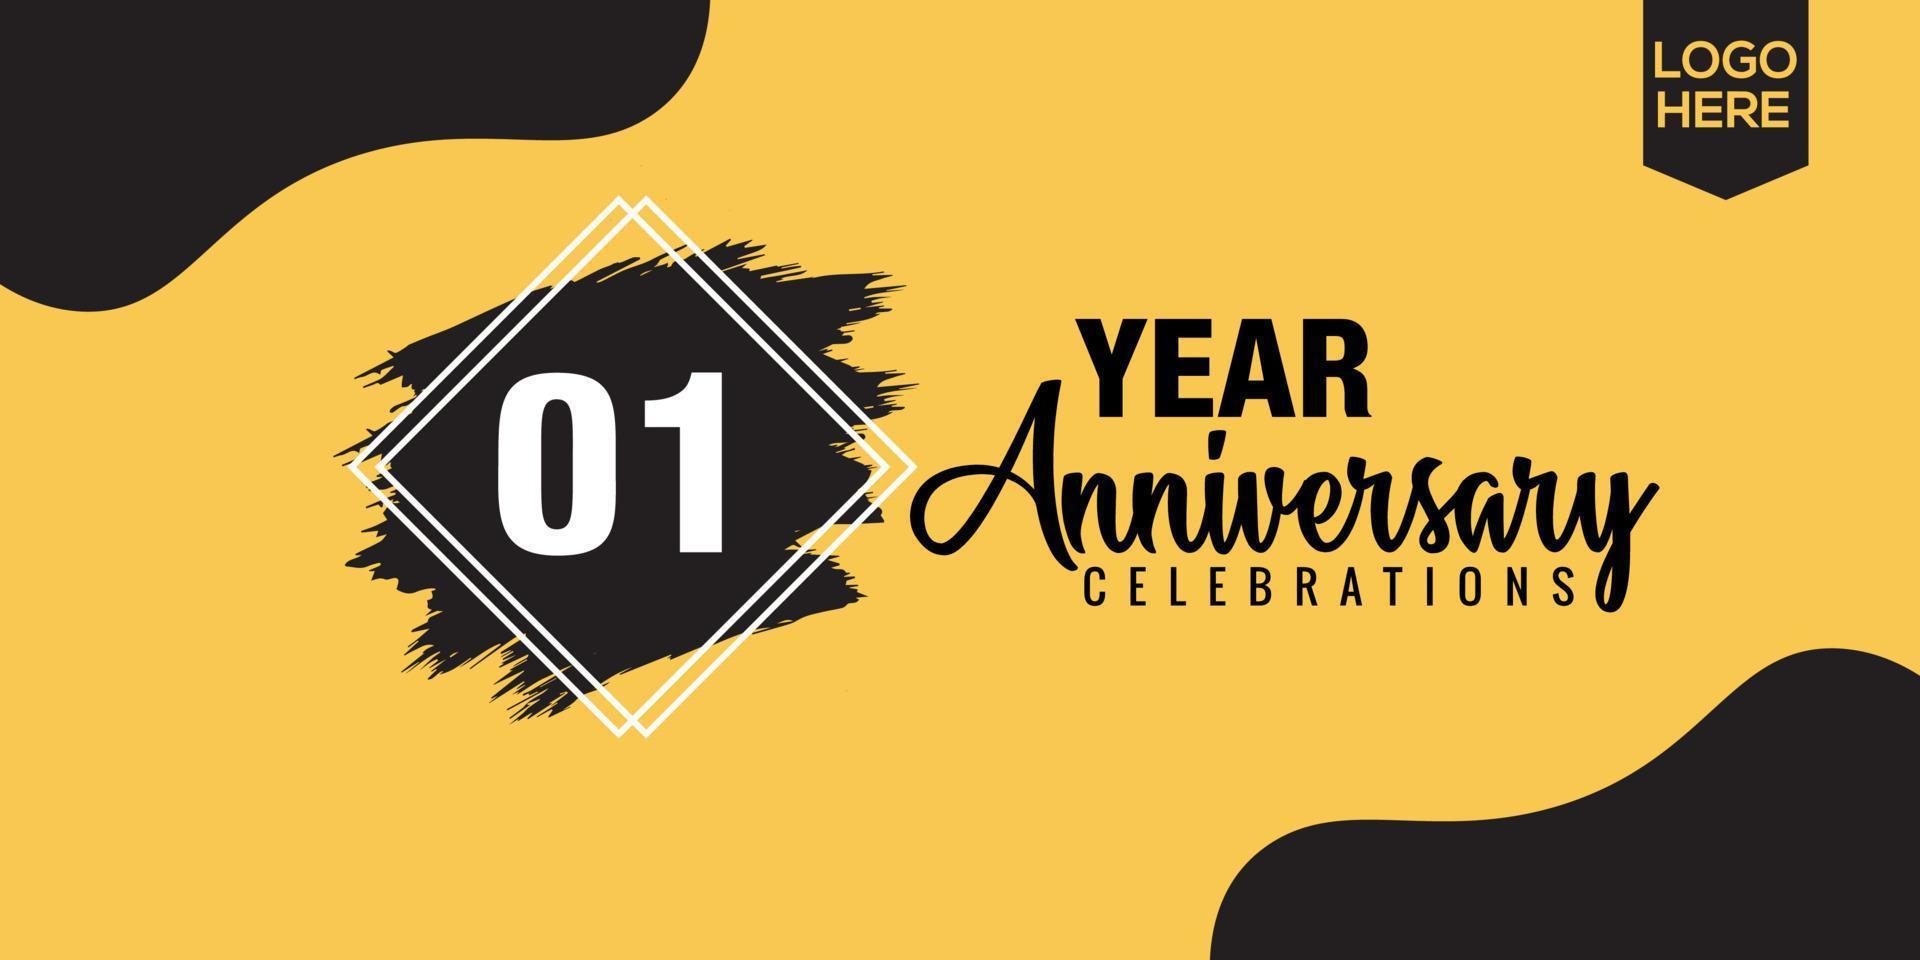 01st years anniversary celebration logo design with black brush and yellow color with black abstract vector illustration